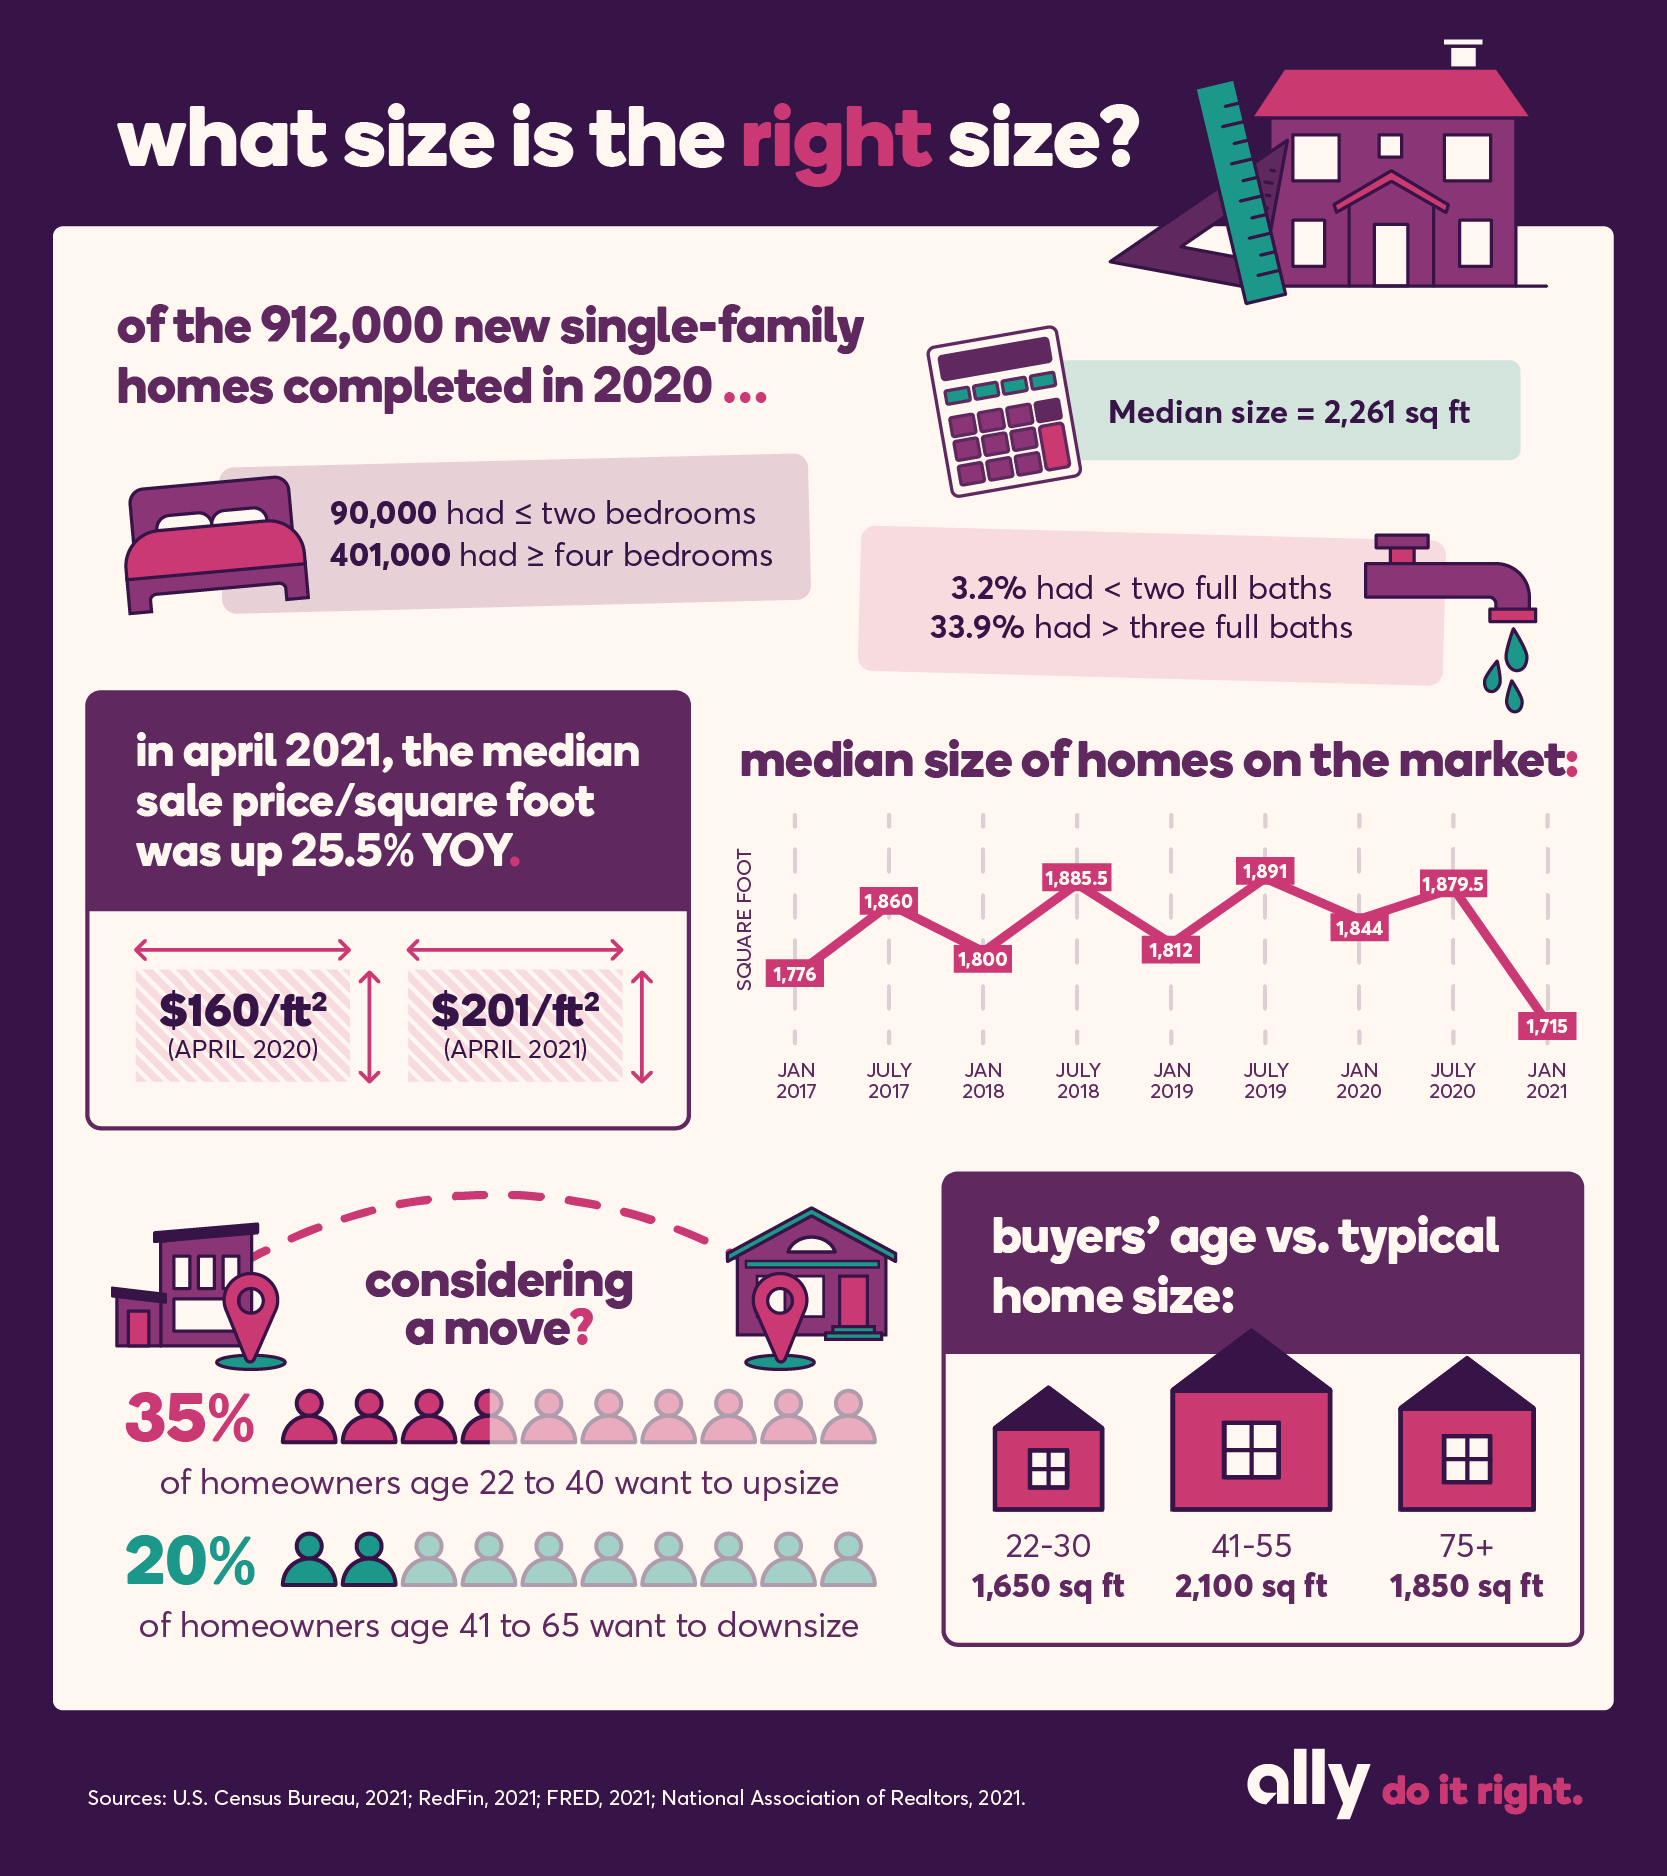 What size is the right size? Of the 912,000 new single-family homes completed in 2020, the median size of a home was 2,261 square feet. 90,000 had less than or equal to two bedrooms. 401,000 had greater than or equal to four bedrooms. 3.2% had less than two full baths. 33.9% had more than three full baths. In April 2021, the median sale price by square footage was up 25.5% year over year. It went from $160 per square foot in April 2020 to $201 per square foot in April 2021. The median size of homes on the market went from 1,776 square feet in January 2017 up to a high of 1,891 square feet in July of 2019, and back down to 1,715 square feet in January 2021. Considering a move? 35% of homeowners age 22 to 40 want to upsize. 20% of homeowners age 41 to 65 want to downsize. The average buyers’ age vs typical home size is 1,650 square feet for buyers ages 22 to 30, 2,100 square feet for buyers ages 41 to 55, and 1,850 square feet for buyers ages 75 and over.